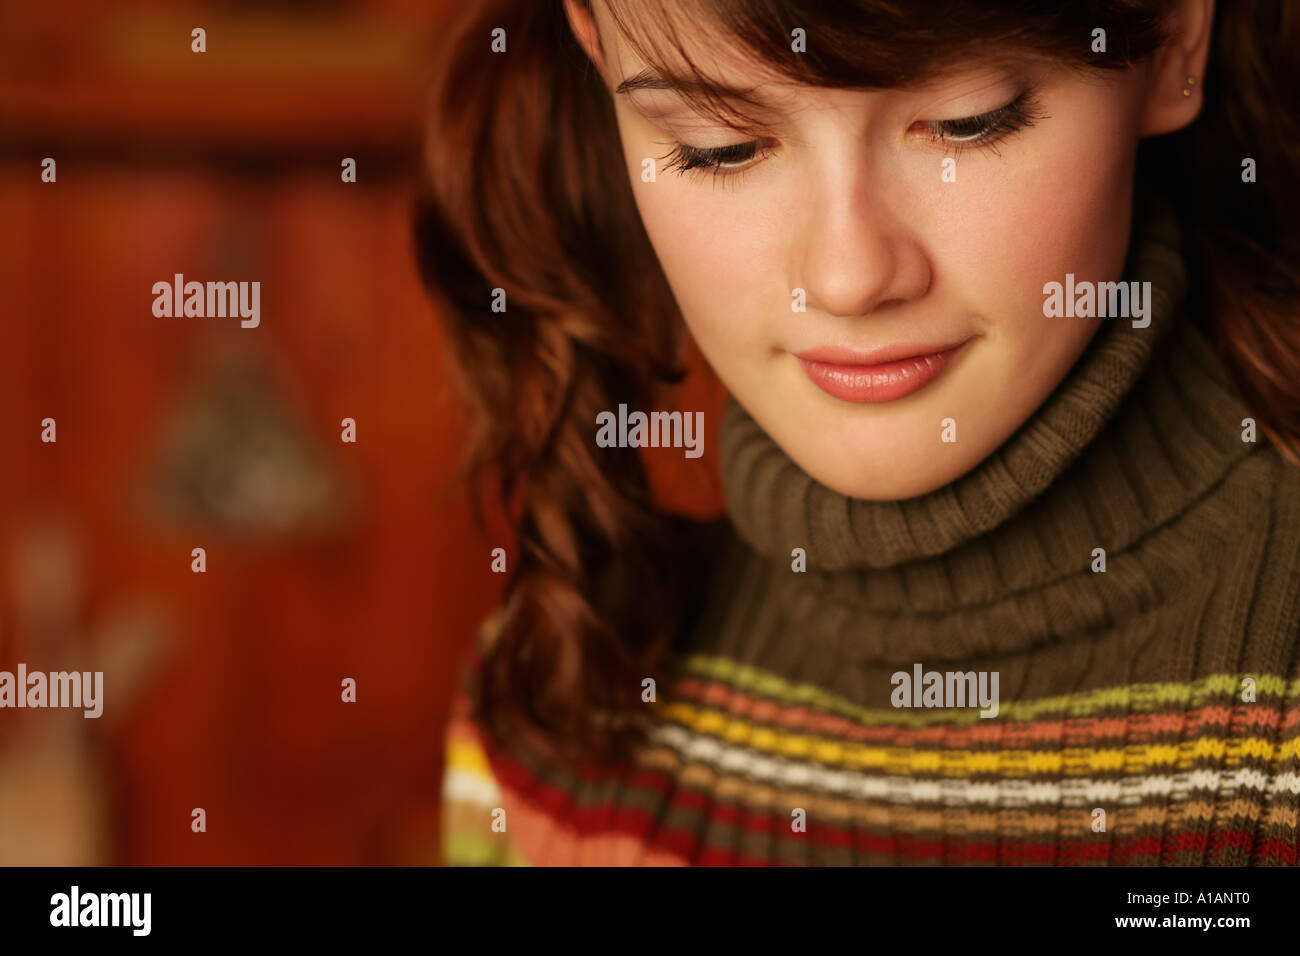 Young woman in roll neck sweater Stock Photo